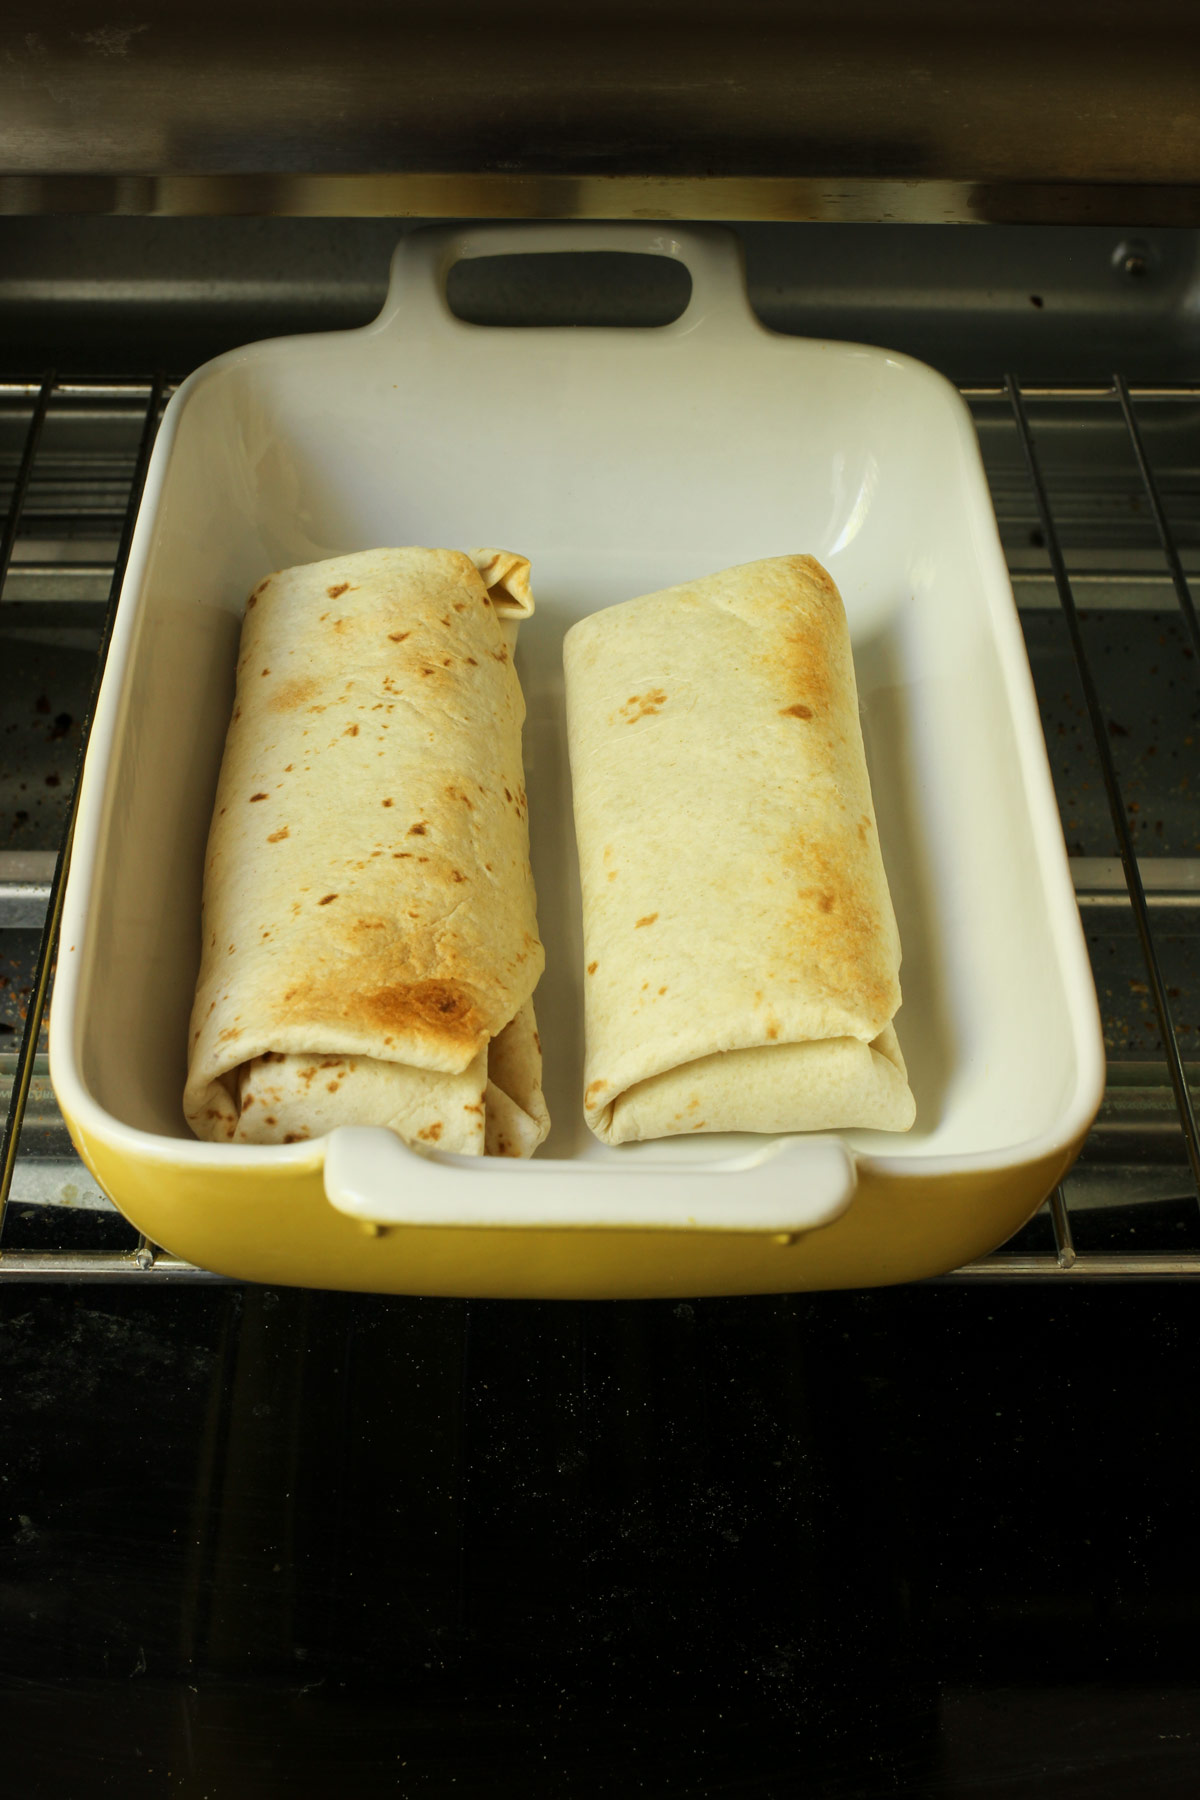 two burritos baked in a yellow baking dish.